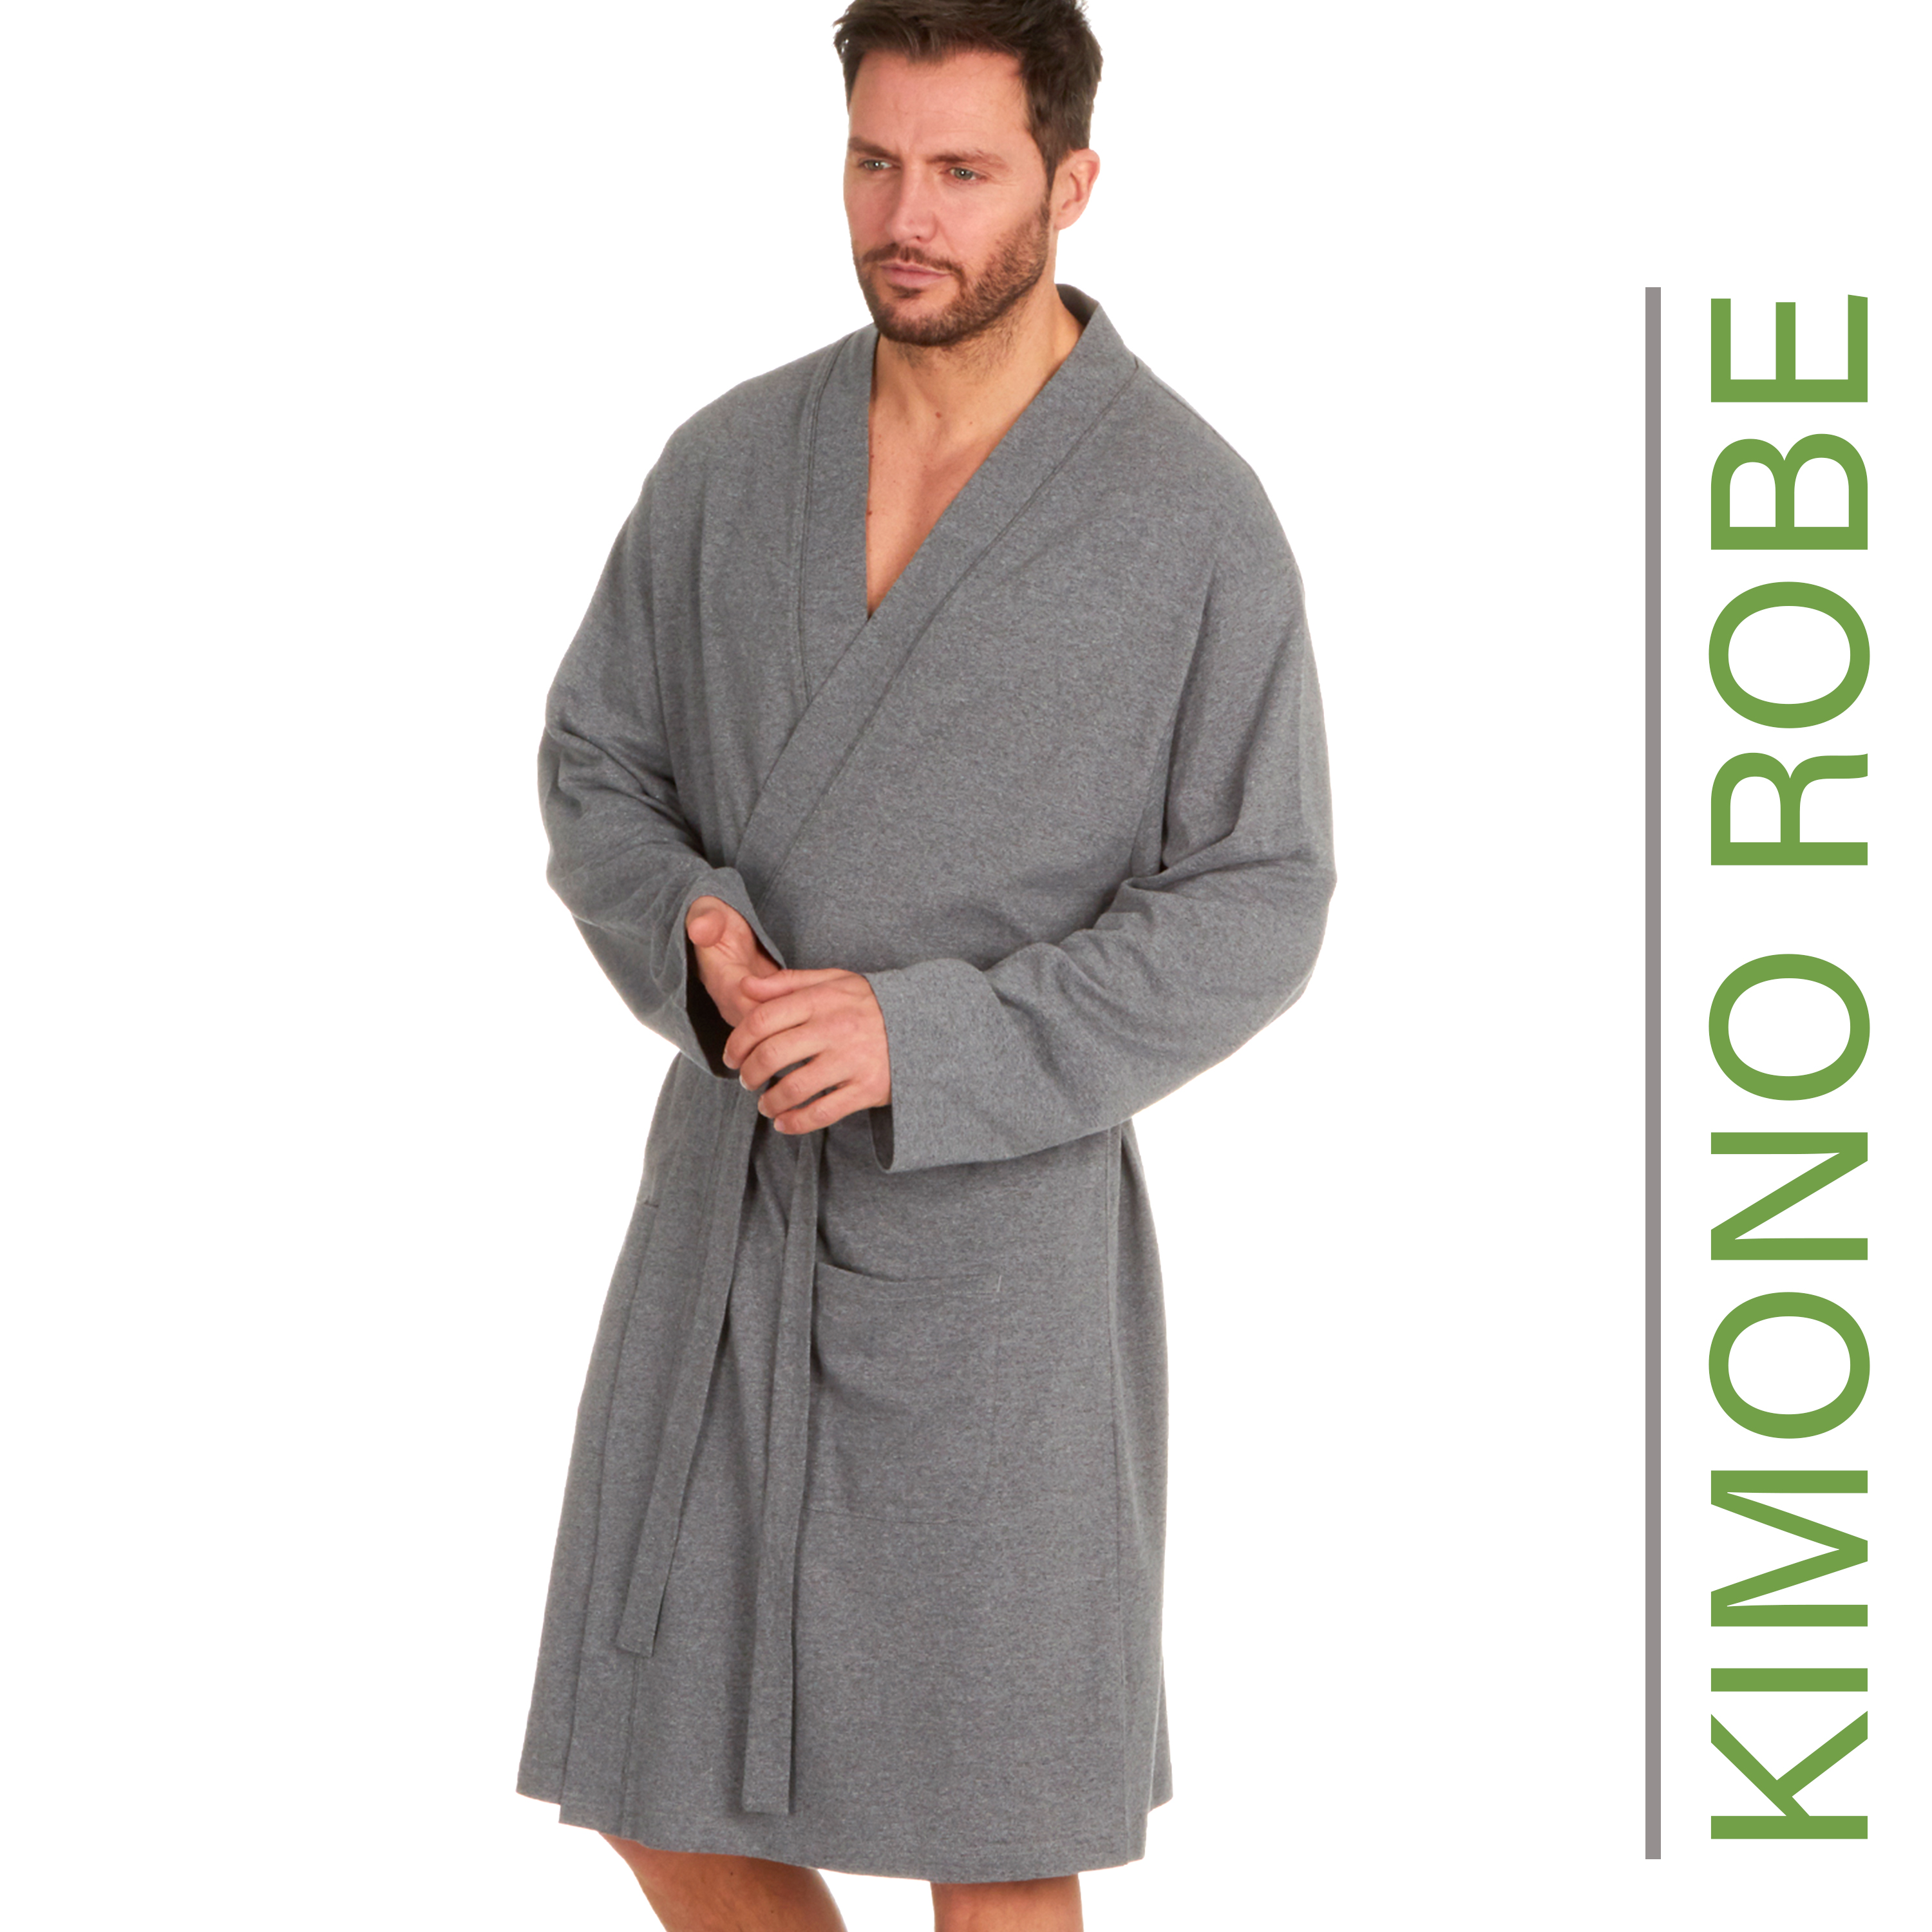 Mens Easy Care Cotton Jersey Summer Robe/Dressing Gown (Large, Grey) :  Amazon.co.uk: Fashion